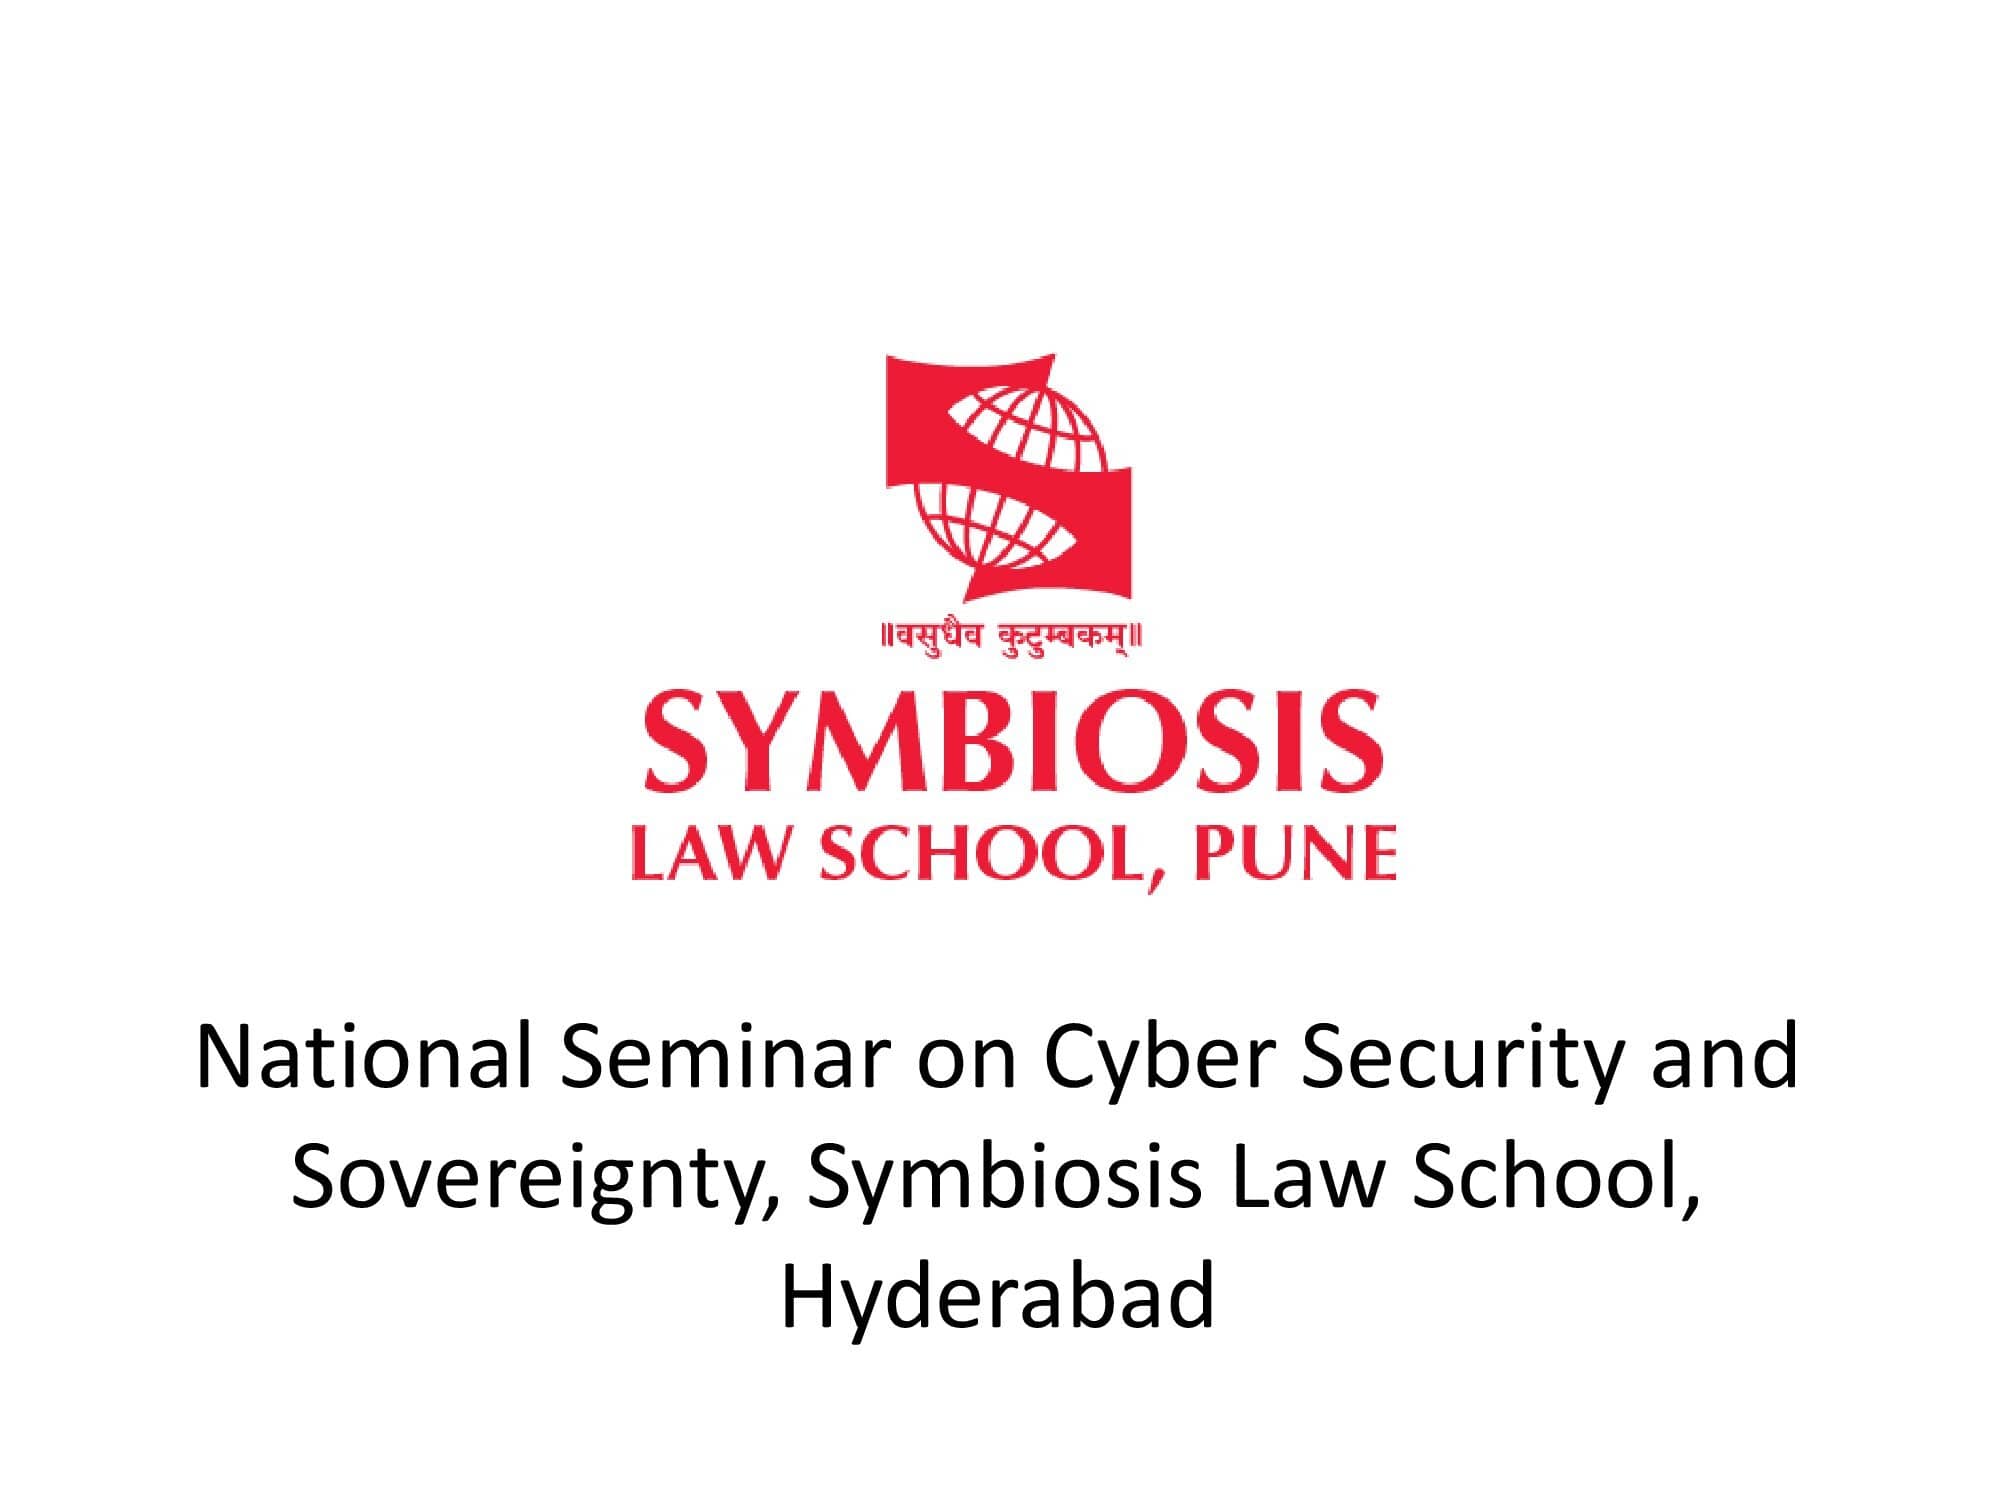 National Seminar on Cyber Security and Sovereignty, Symbiosis Law School, Hyderabad